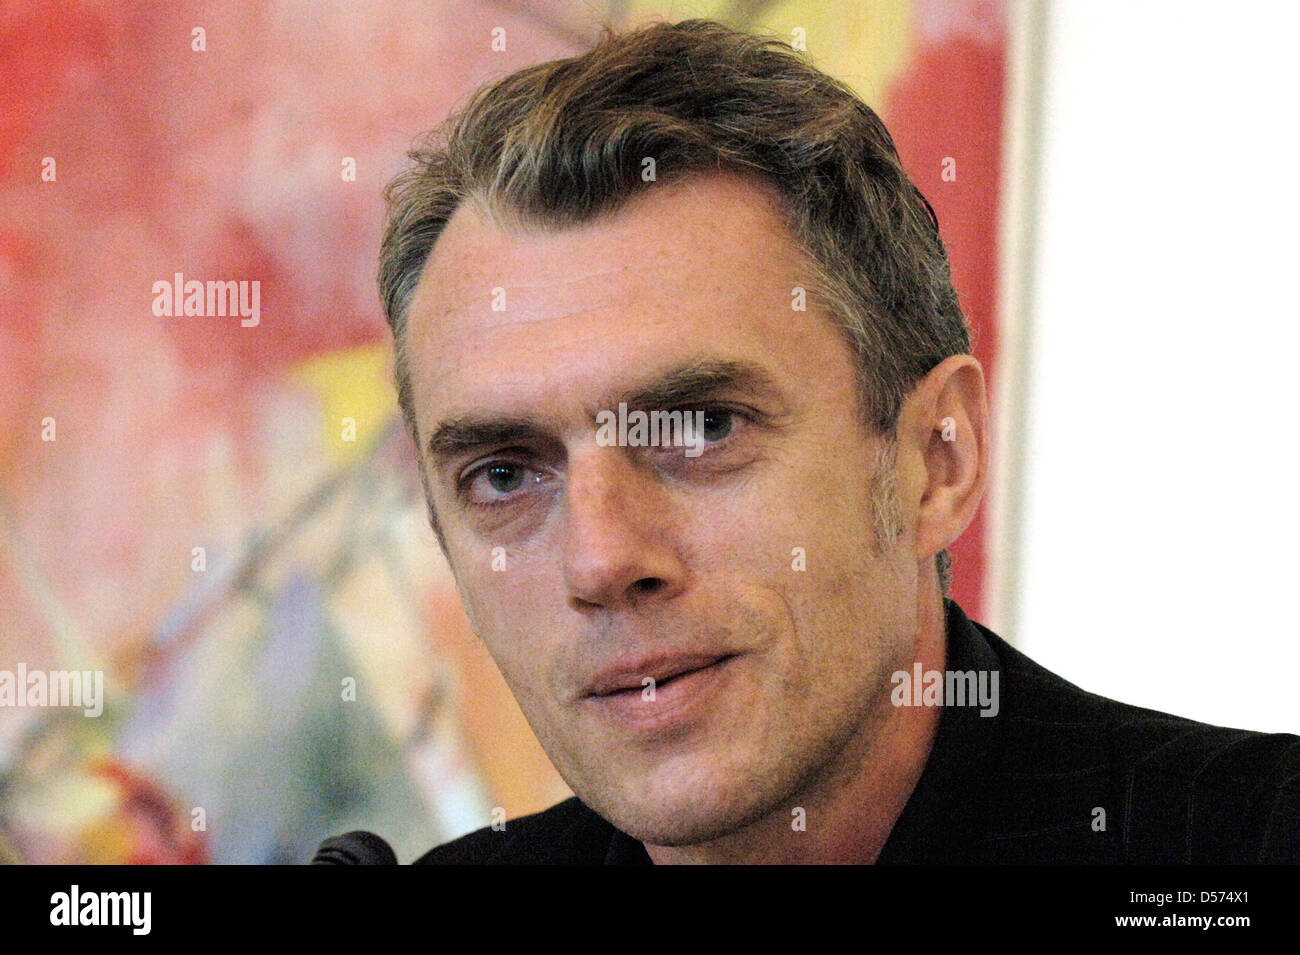 FILE - German painter Neo Rauch during a press conference at 'Hochschule fuer Grafik and Buchkunst' (University of Graphics and Book Art') in Leipzig, Germany, 12 October 2005. Photo: Waltraud Grubitzsch Stock Photo